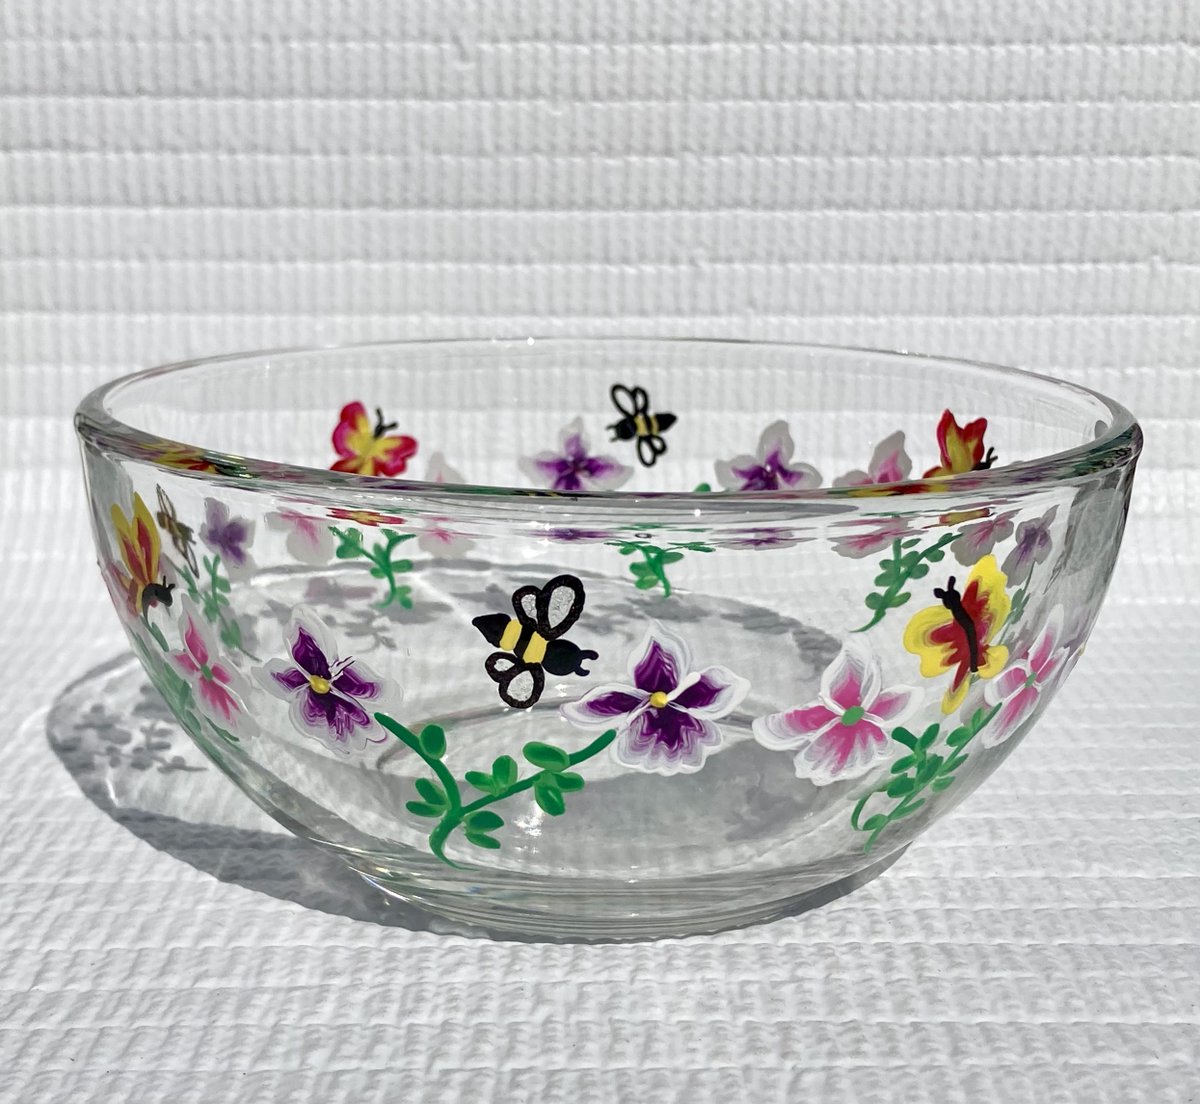 Spring bowl is a great Mothers Day gift etsy.com/listing/169454… #mothersdaygift #candydish #homedecor #SMILEtt23 #springflowers #etsyshop #shopsmall